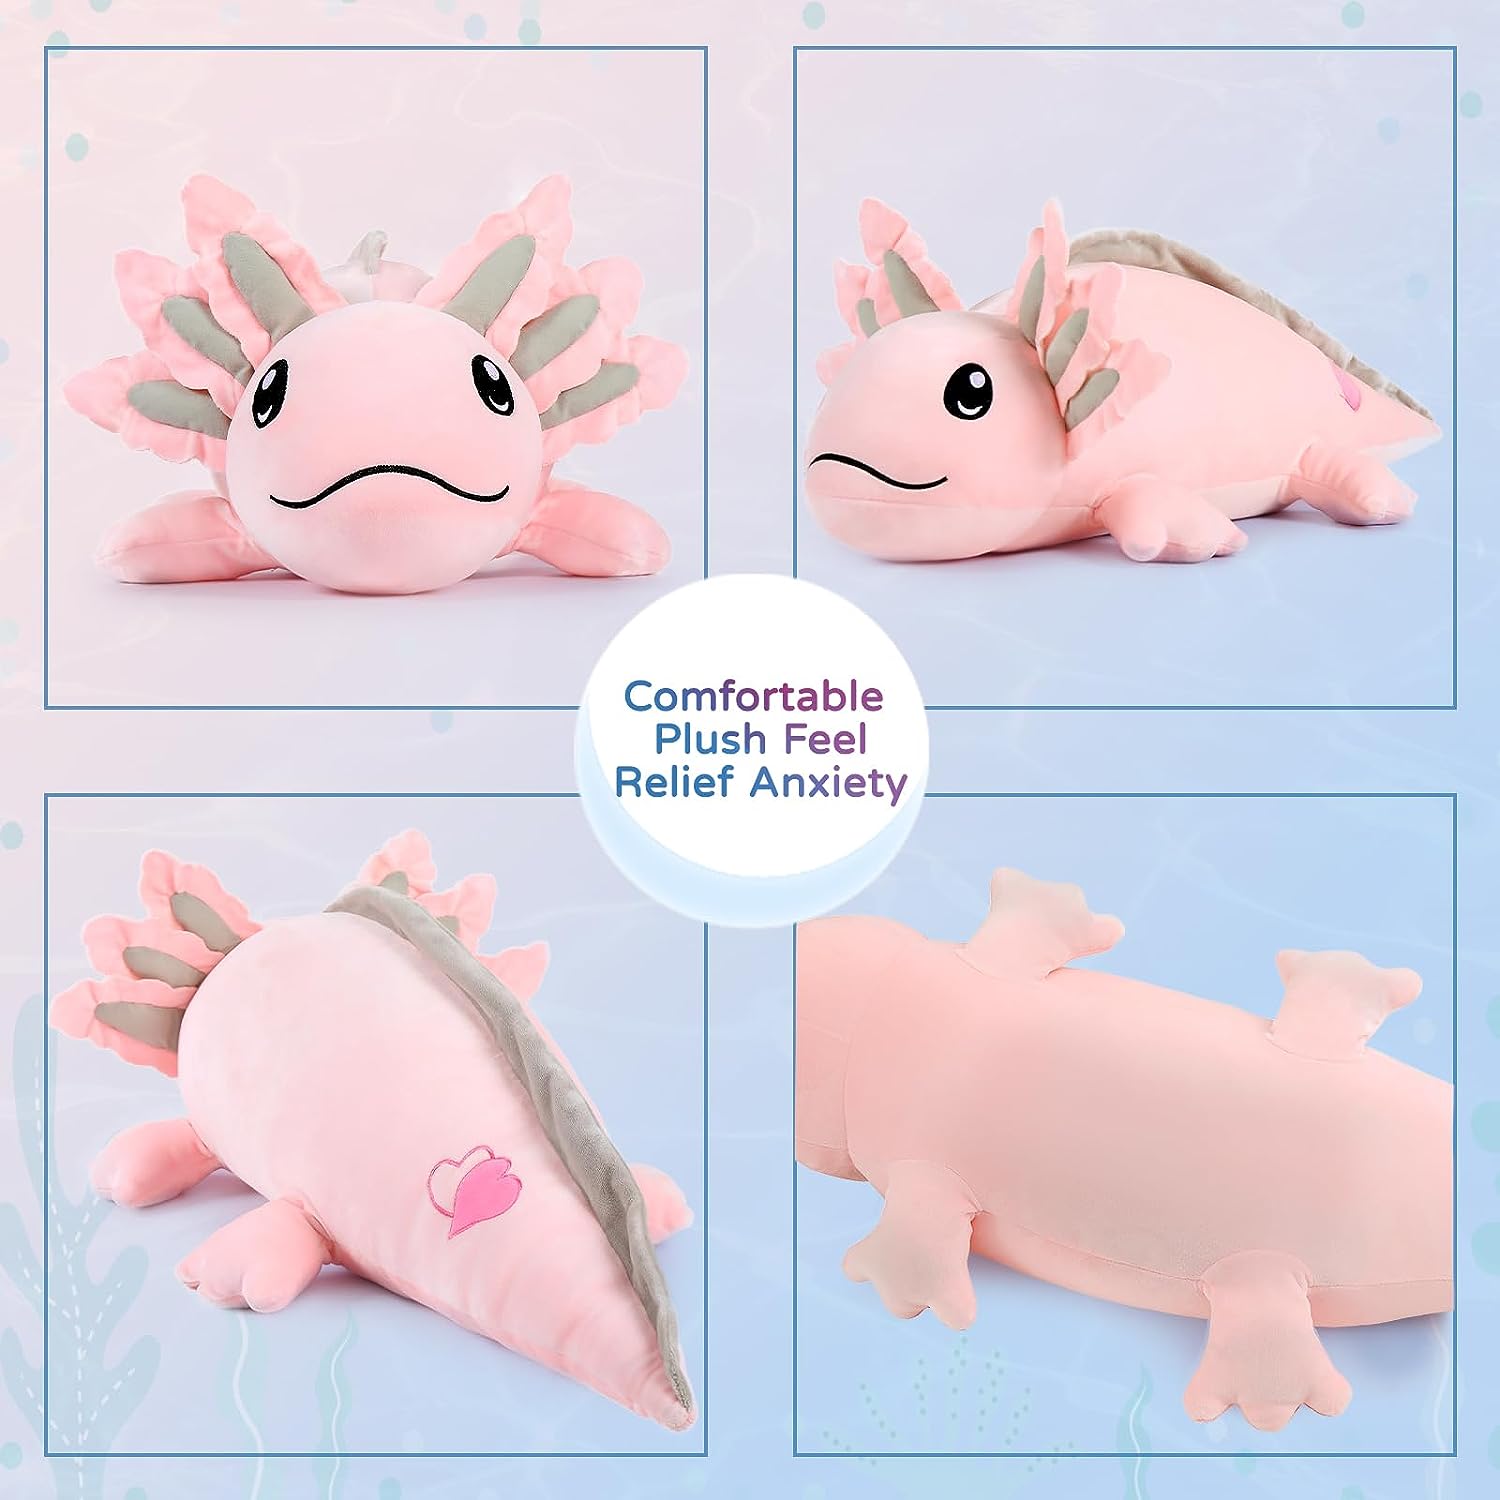 Weighted Axolotl Stuffed Animal Toy, 31.5 Inches